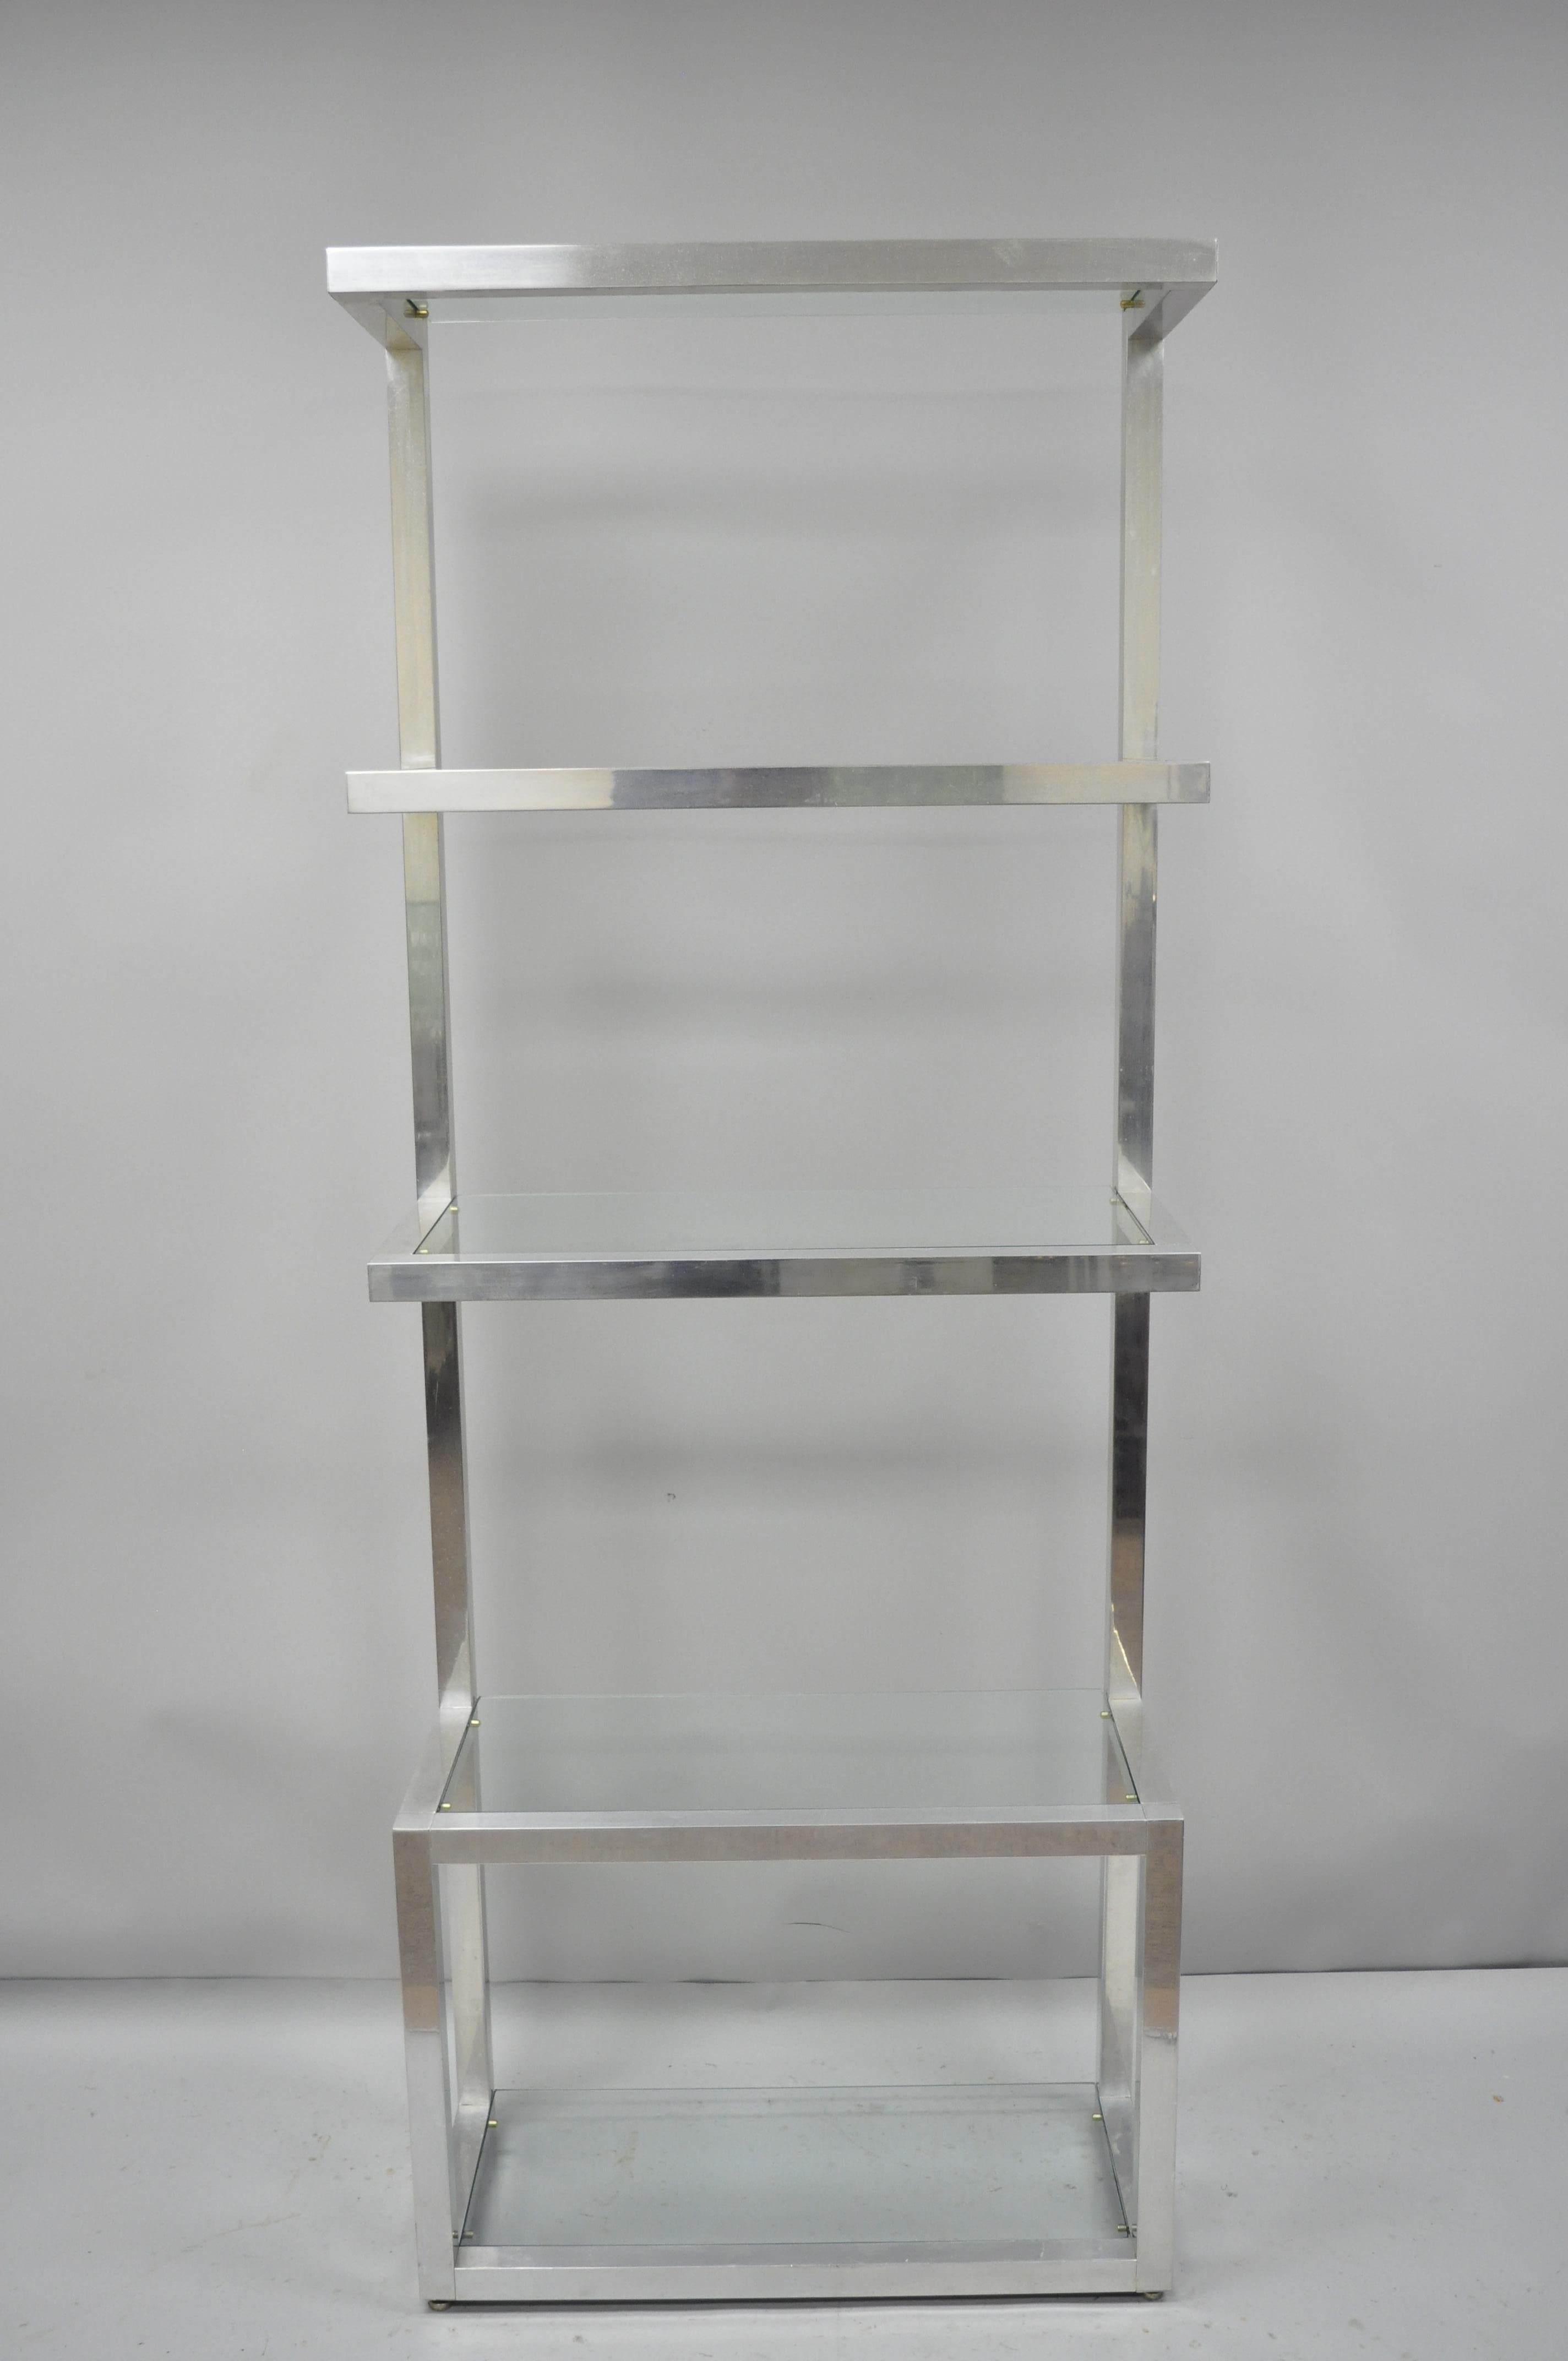 Vintage Mid-Century Modern aluminum and glass etagere floating display shelf. Item features square aluminum tube construction, floating shelves, clean modernist lines, 5 glass shelves, great style and form, circa 1970. Measurements: 80.5